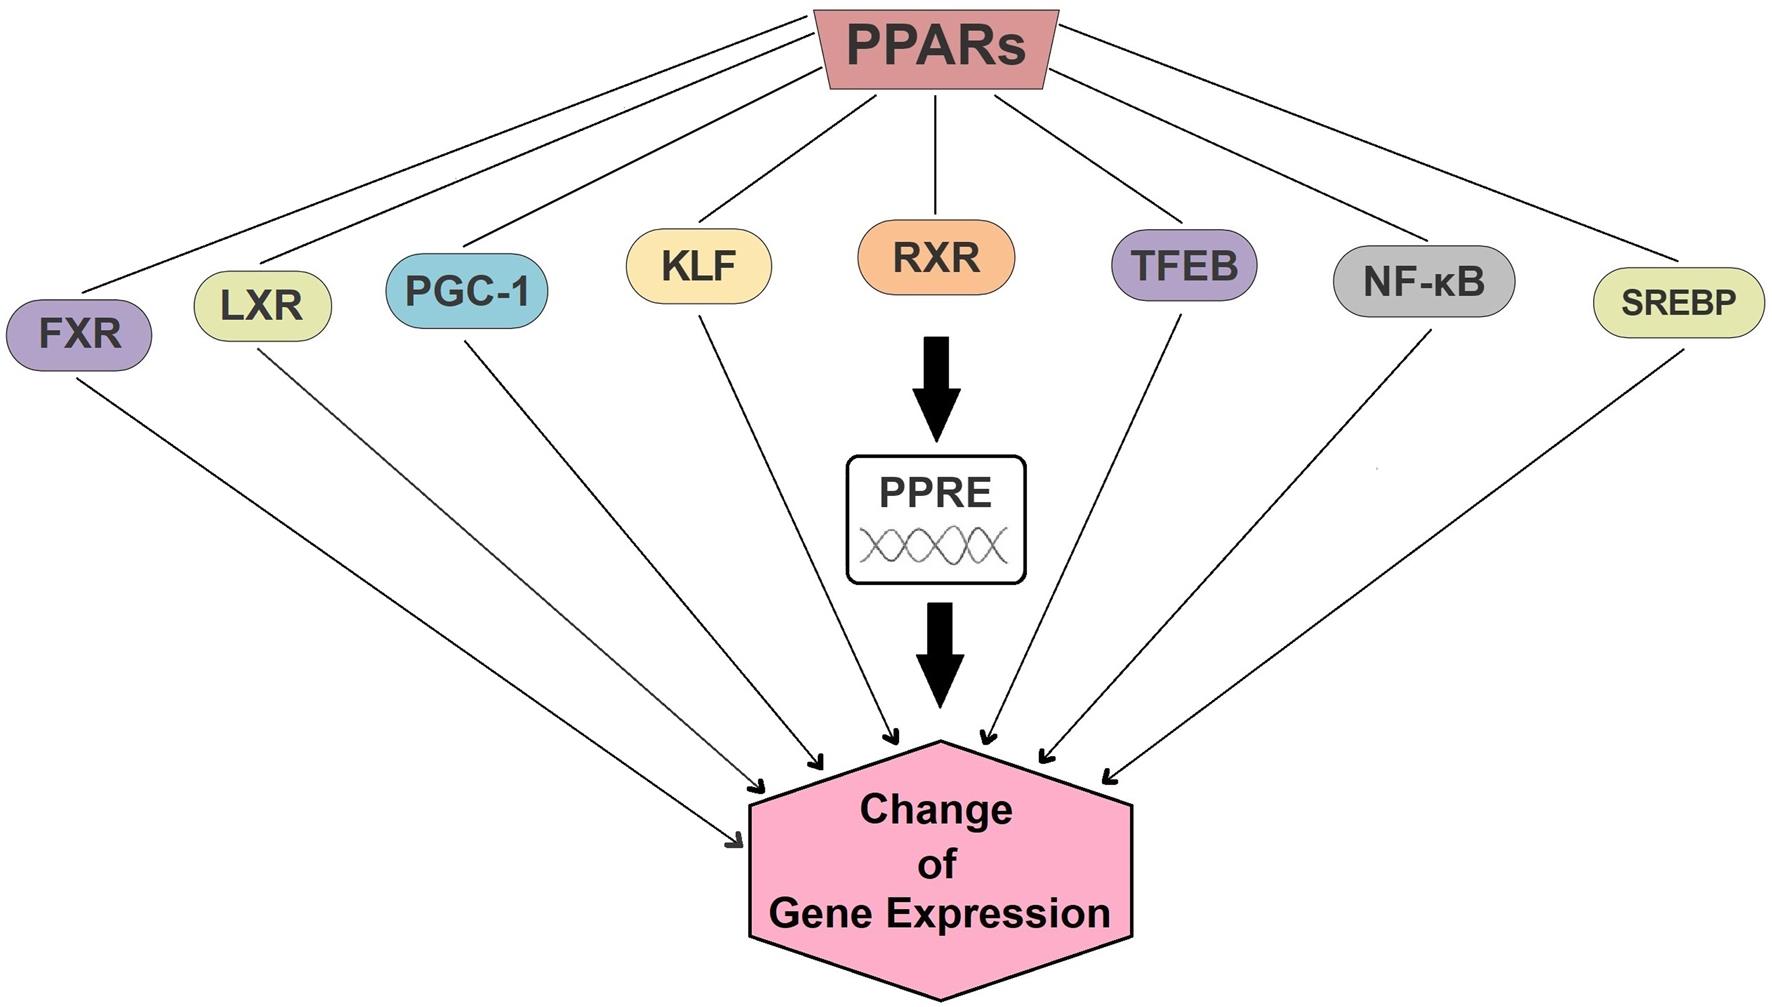 Interactions of PPARs and other transcription factors.